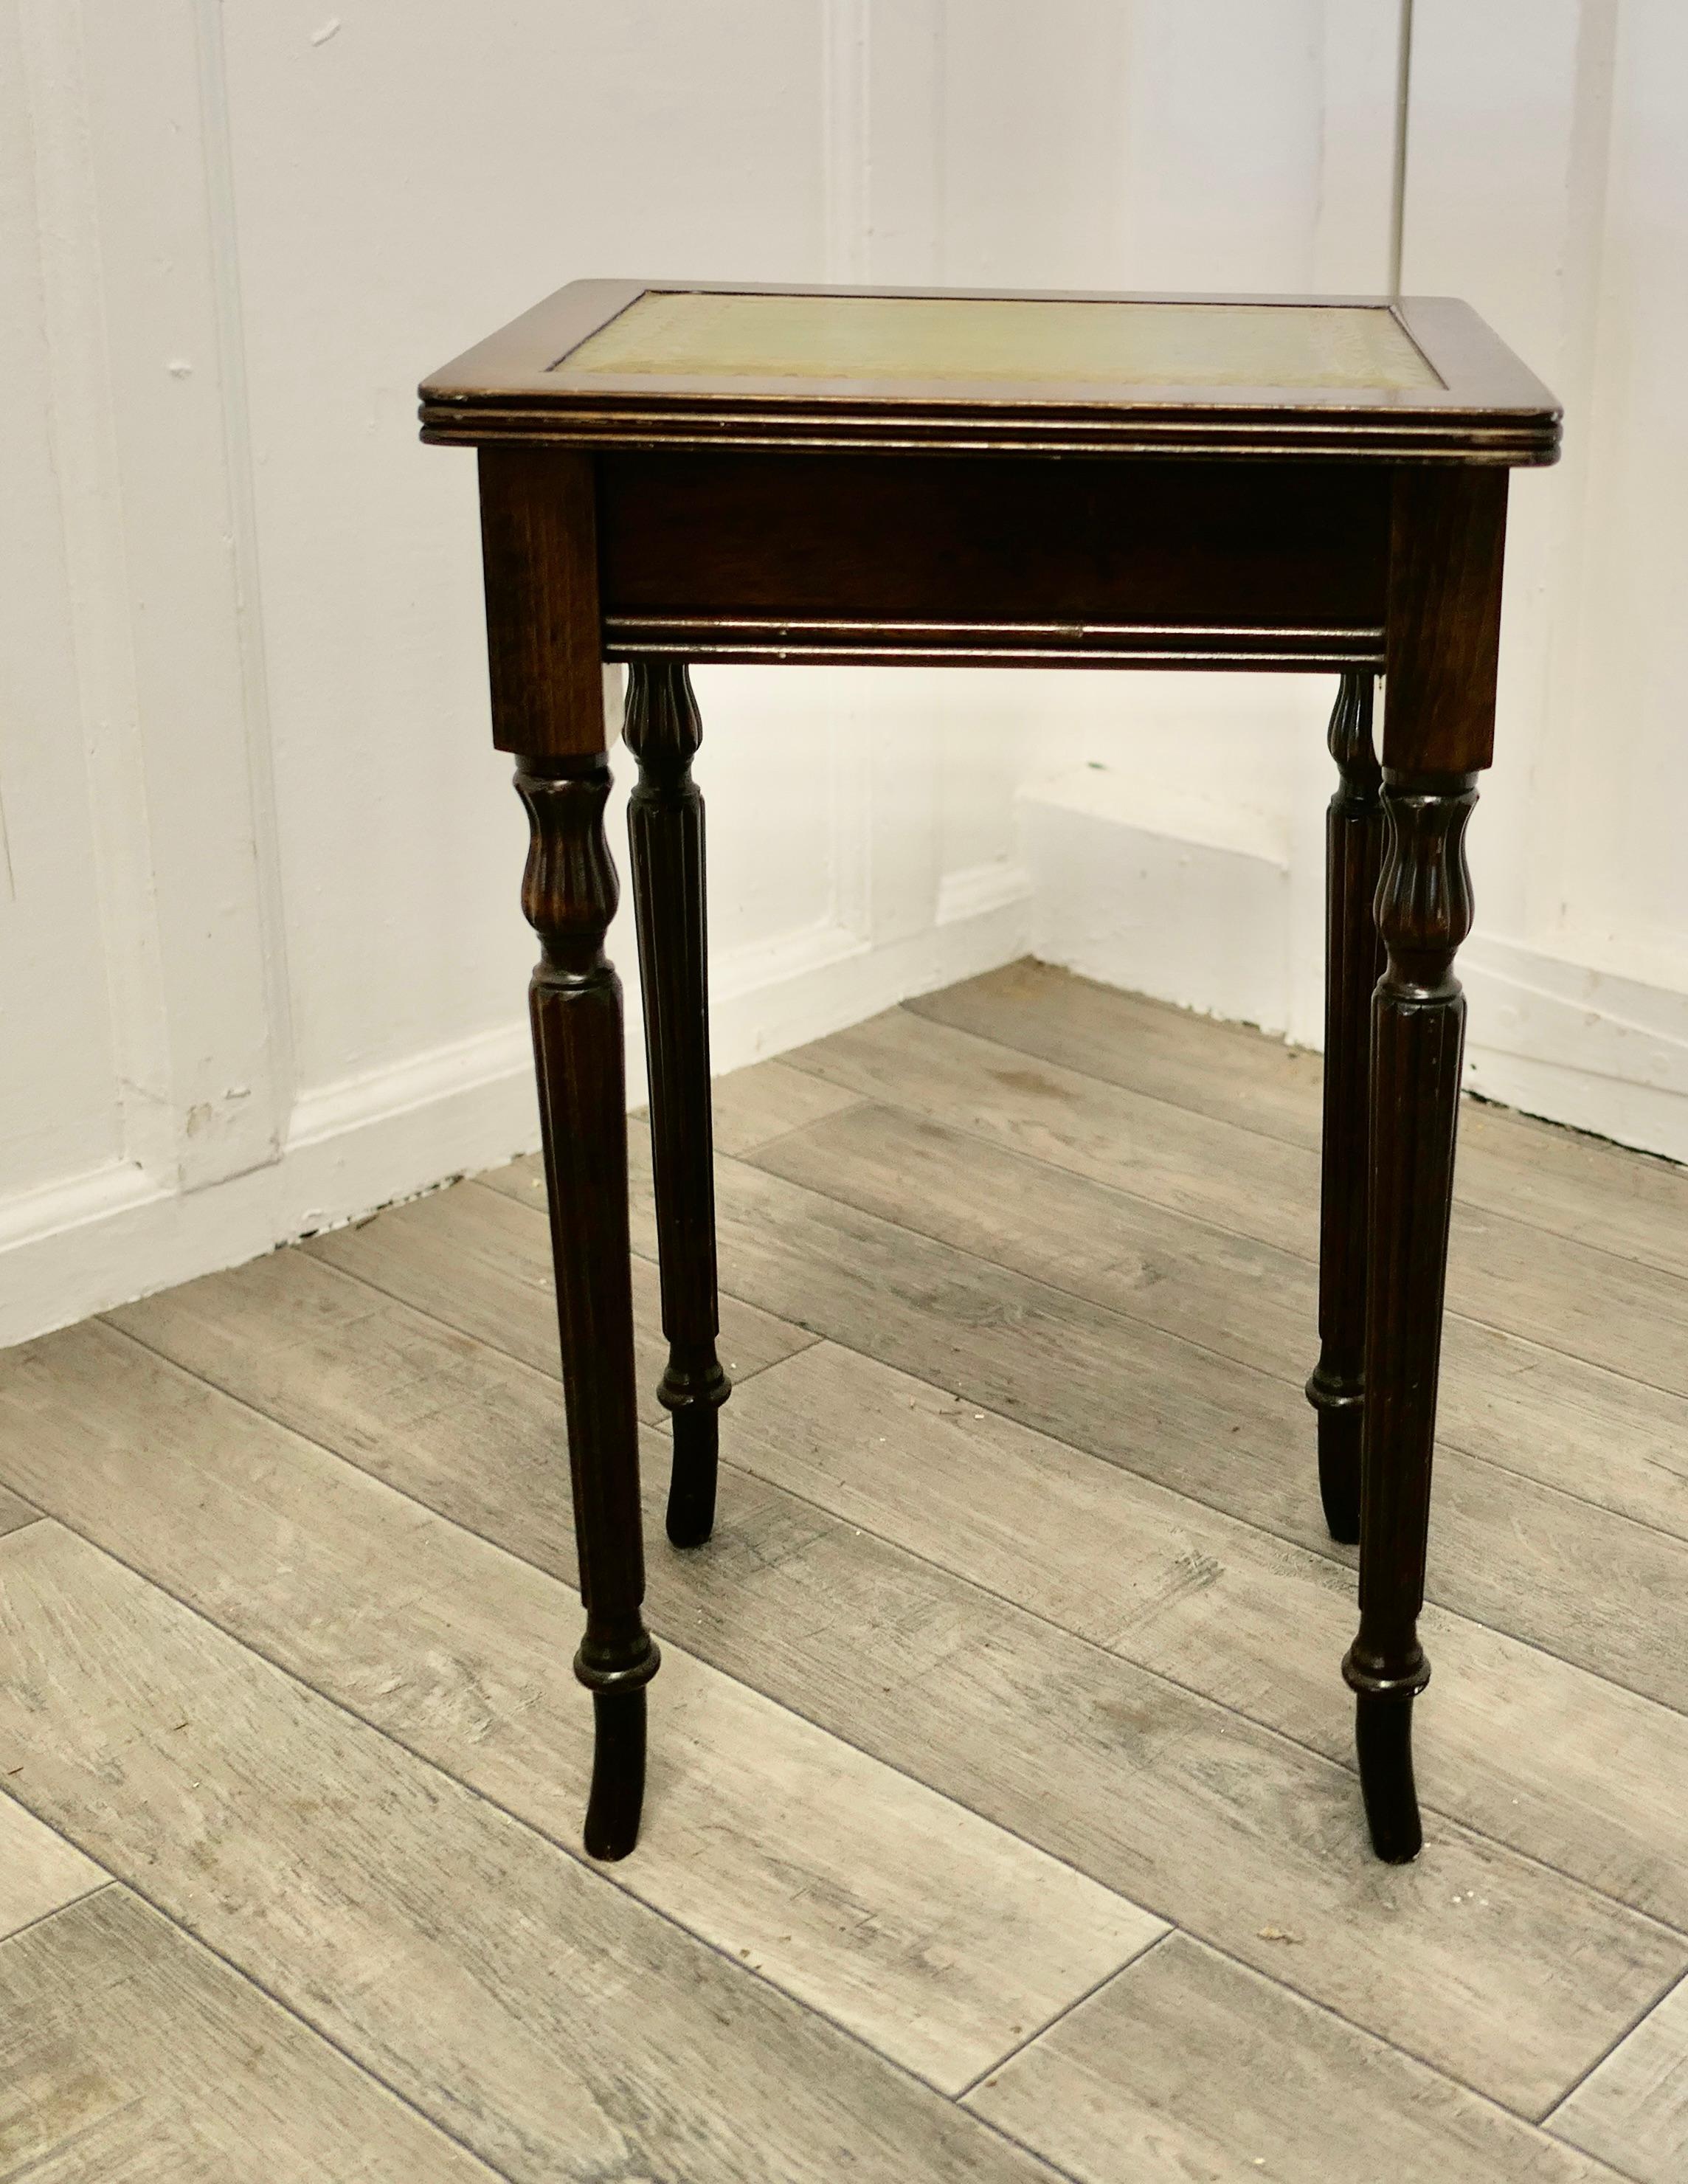 Small Regency style leather top lamp table

An elegant small table with dainty dark wood legs and an inset tooled moss green leather, it is an ideal size for a large lamp
The table 19” tall and 12” x 9.5”
TJK175.